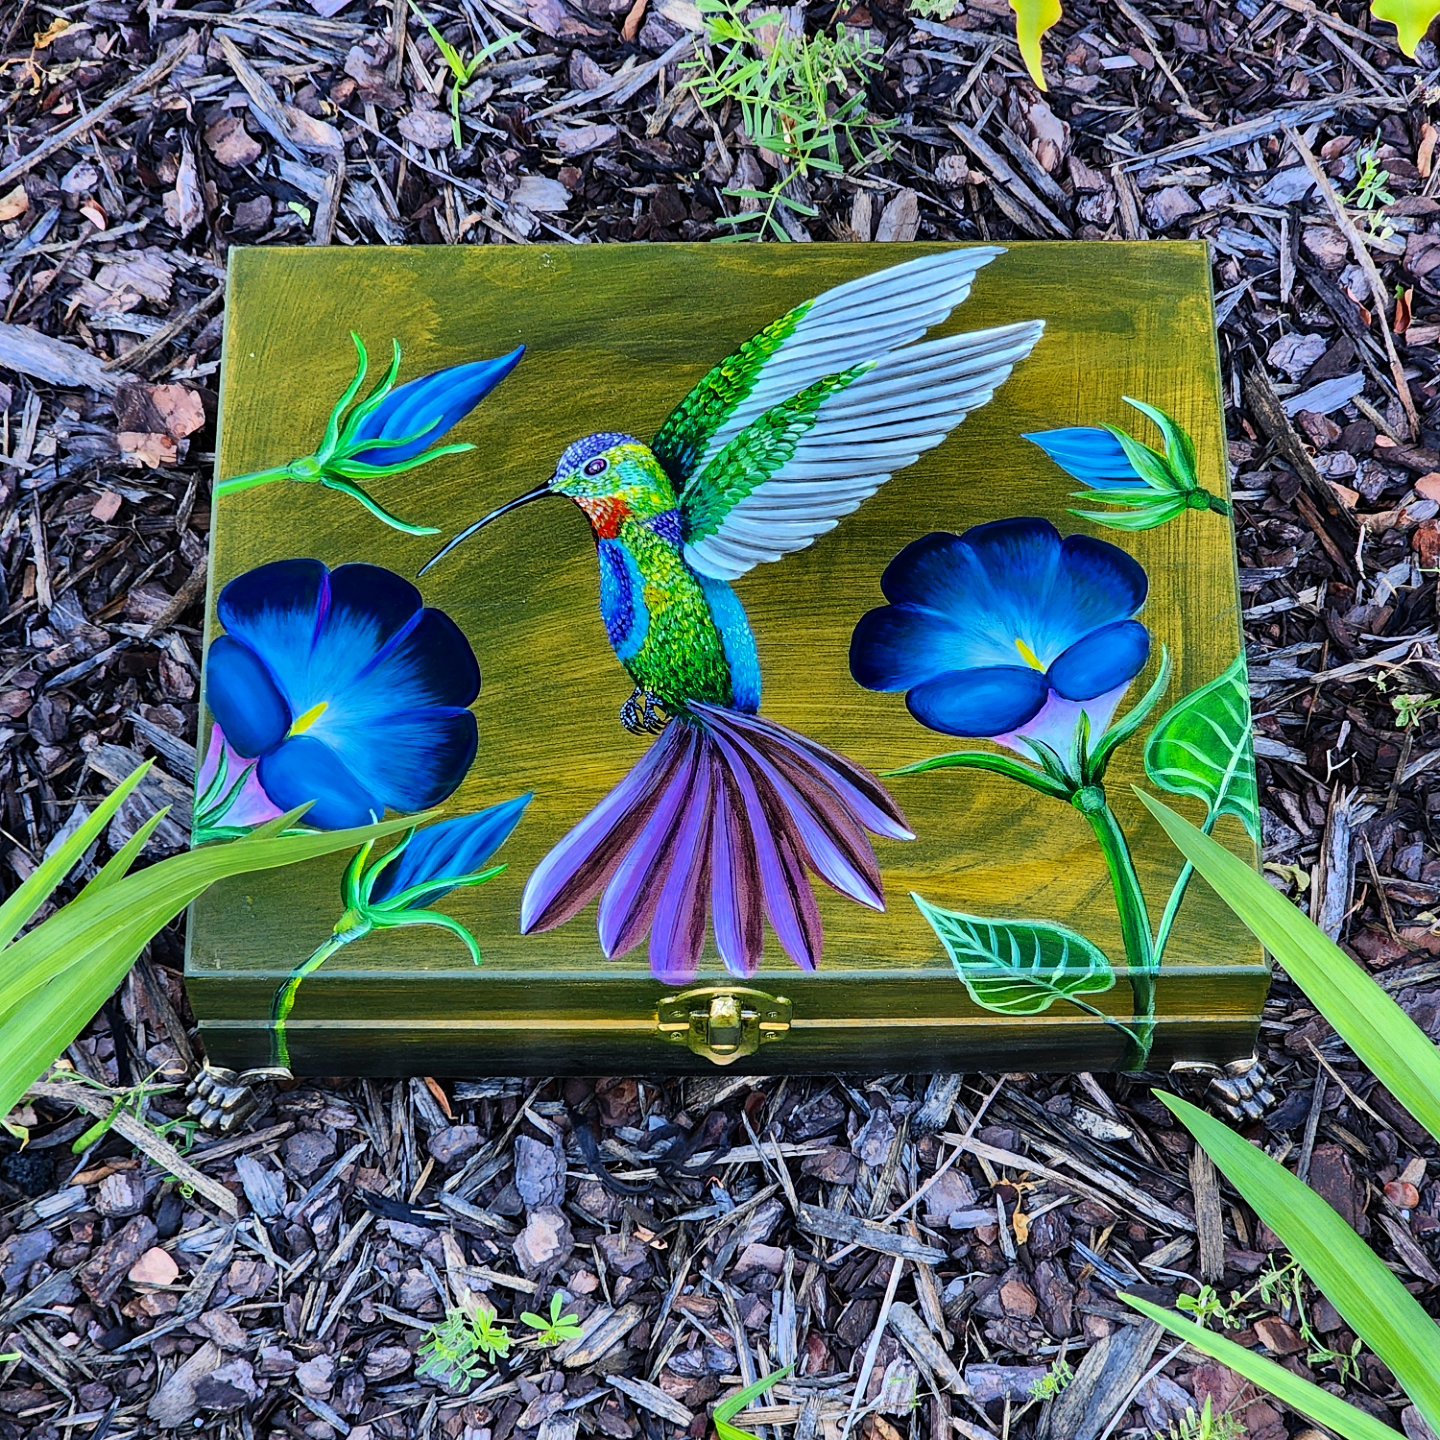 This box was repurposed into a jewelry / trinket box with a magical design of a hummingbird and some morning glories. Brass feet were assembled to the box. The box has been varnished already.